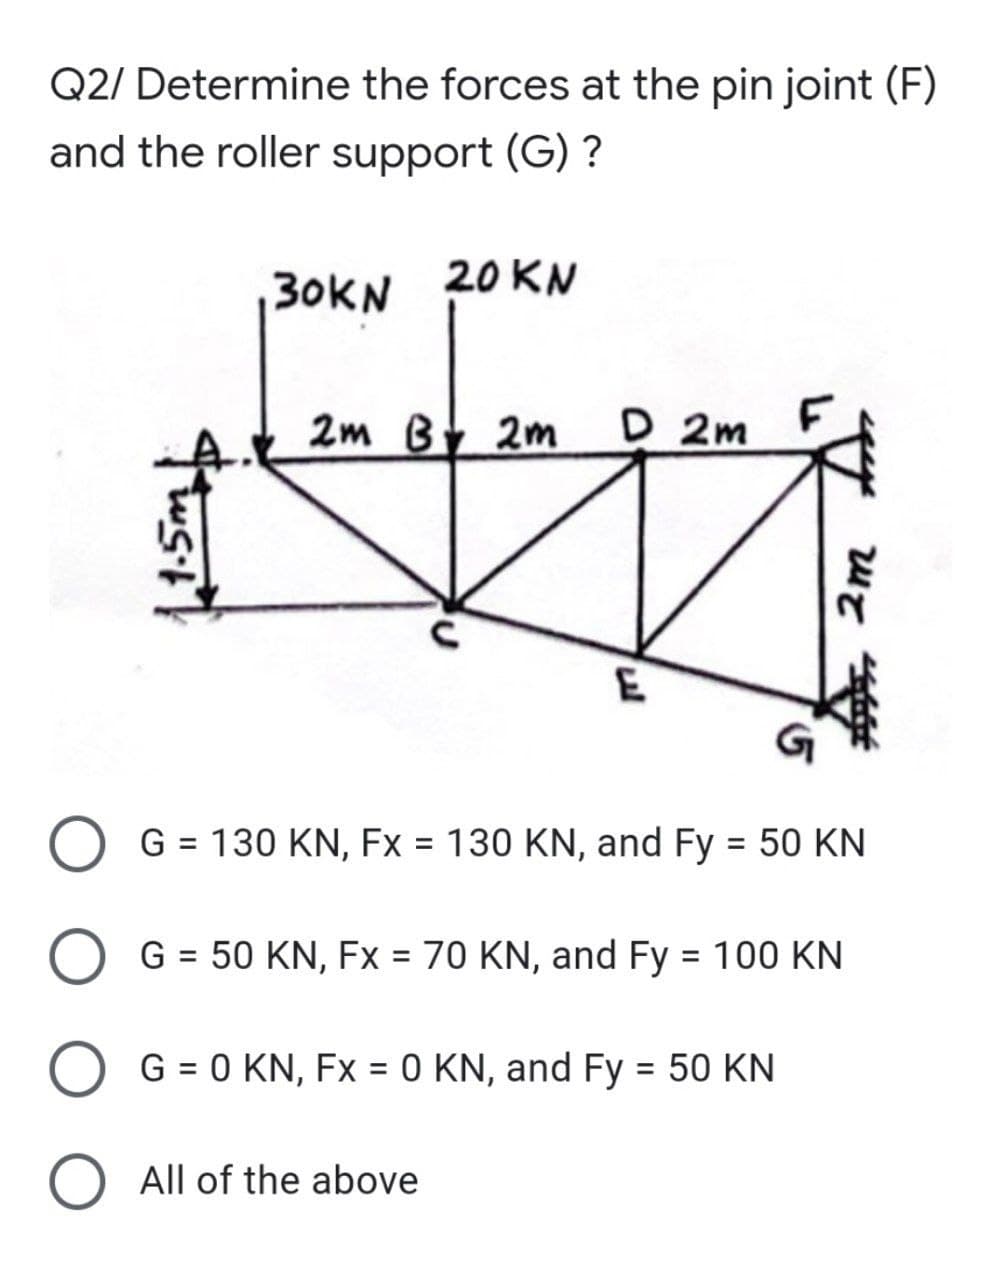 Q2/ Determine the forces at the pin joint (F)
and the roller support (G) ?
30KN 20 KN
2m Bt 2m
D 2m
F
G = 130 KN, Fx = 130 KN, and Fy = 50 KN
%3D
G = 50 KN, Fx = 70 KN, and Fy = 100 KN
%3D
%D
O G = 0 KN, Fx = 0 KN, and Fy = 50 KN
O All of the above
2m
